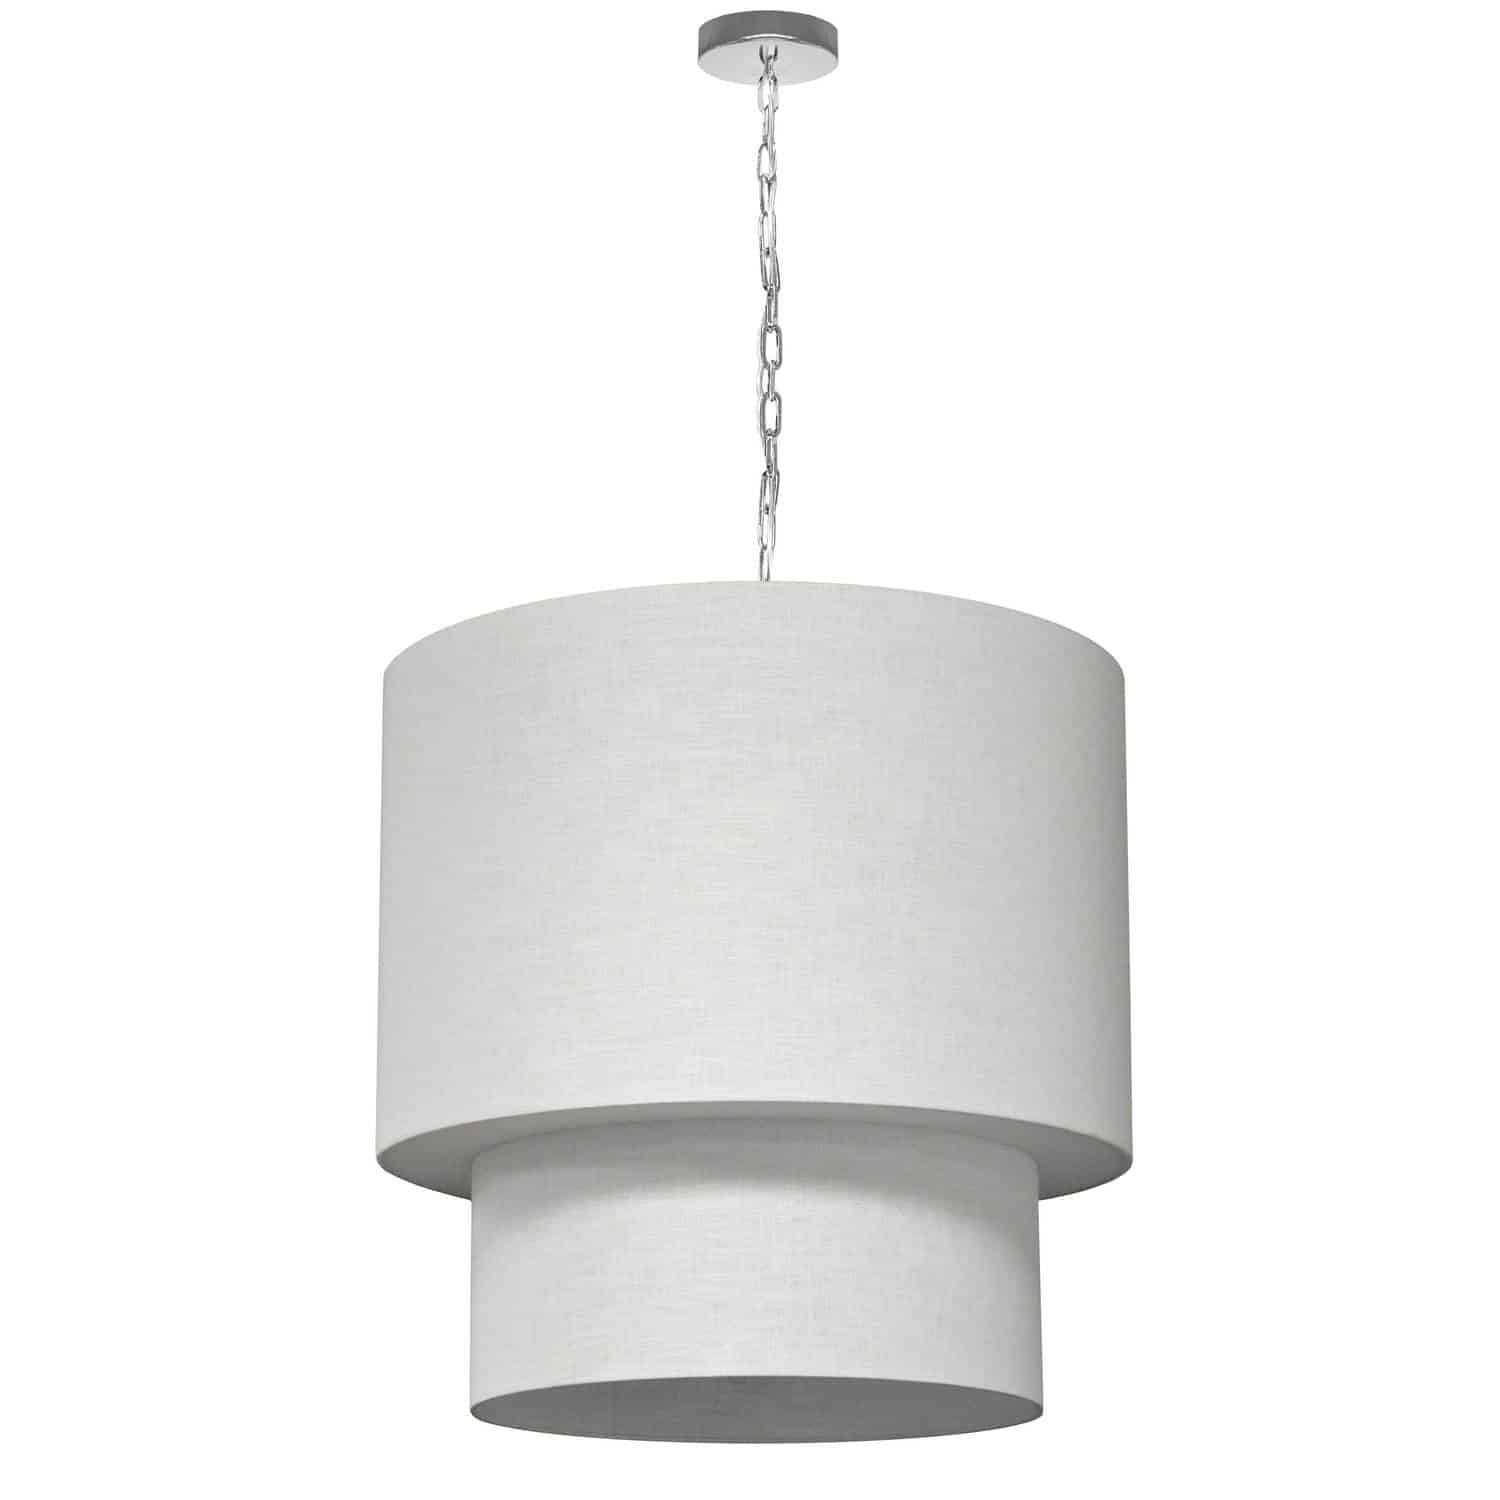 Fabric drum lighting offers a look that can't be ignored, but is simple enough to blend in with strong modern and contemporary décor schemes. Clean lines and an elegant shape give it a luxurious appeal. A simple metal drop and frame is dominated by a fabric drum shade, with choices that include a Notched design with a strong linear appeal, sleek Slanted, and Tapered Drums. Options include both monochromatic designs and contrasting inner/outer shades for a more dramatic effect. With so many options and configurations from floor to pendant lighting, fabric drum lighting is the ideal way to unify the look of a modern home.